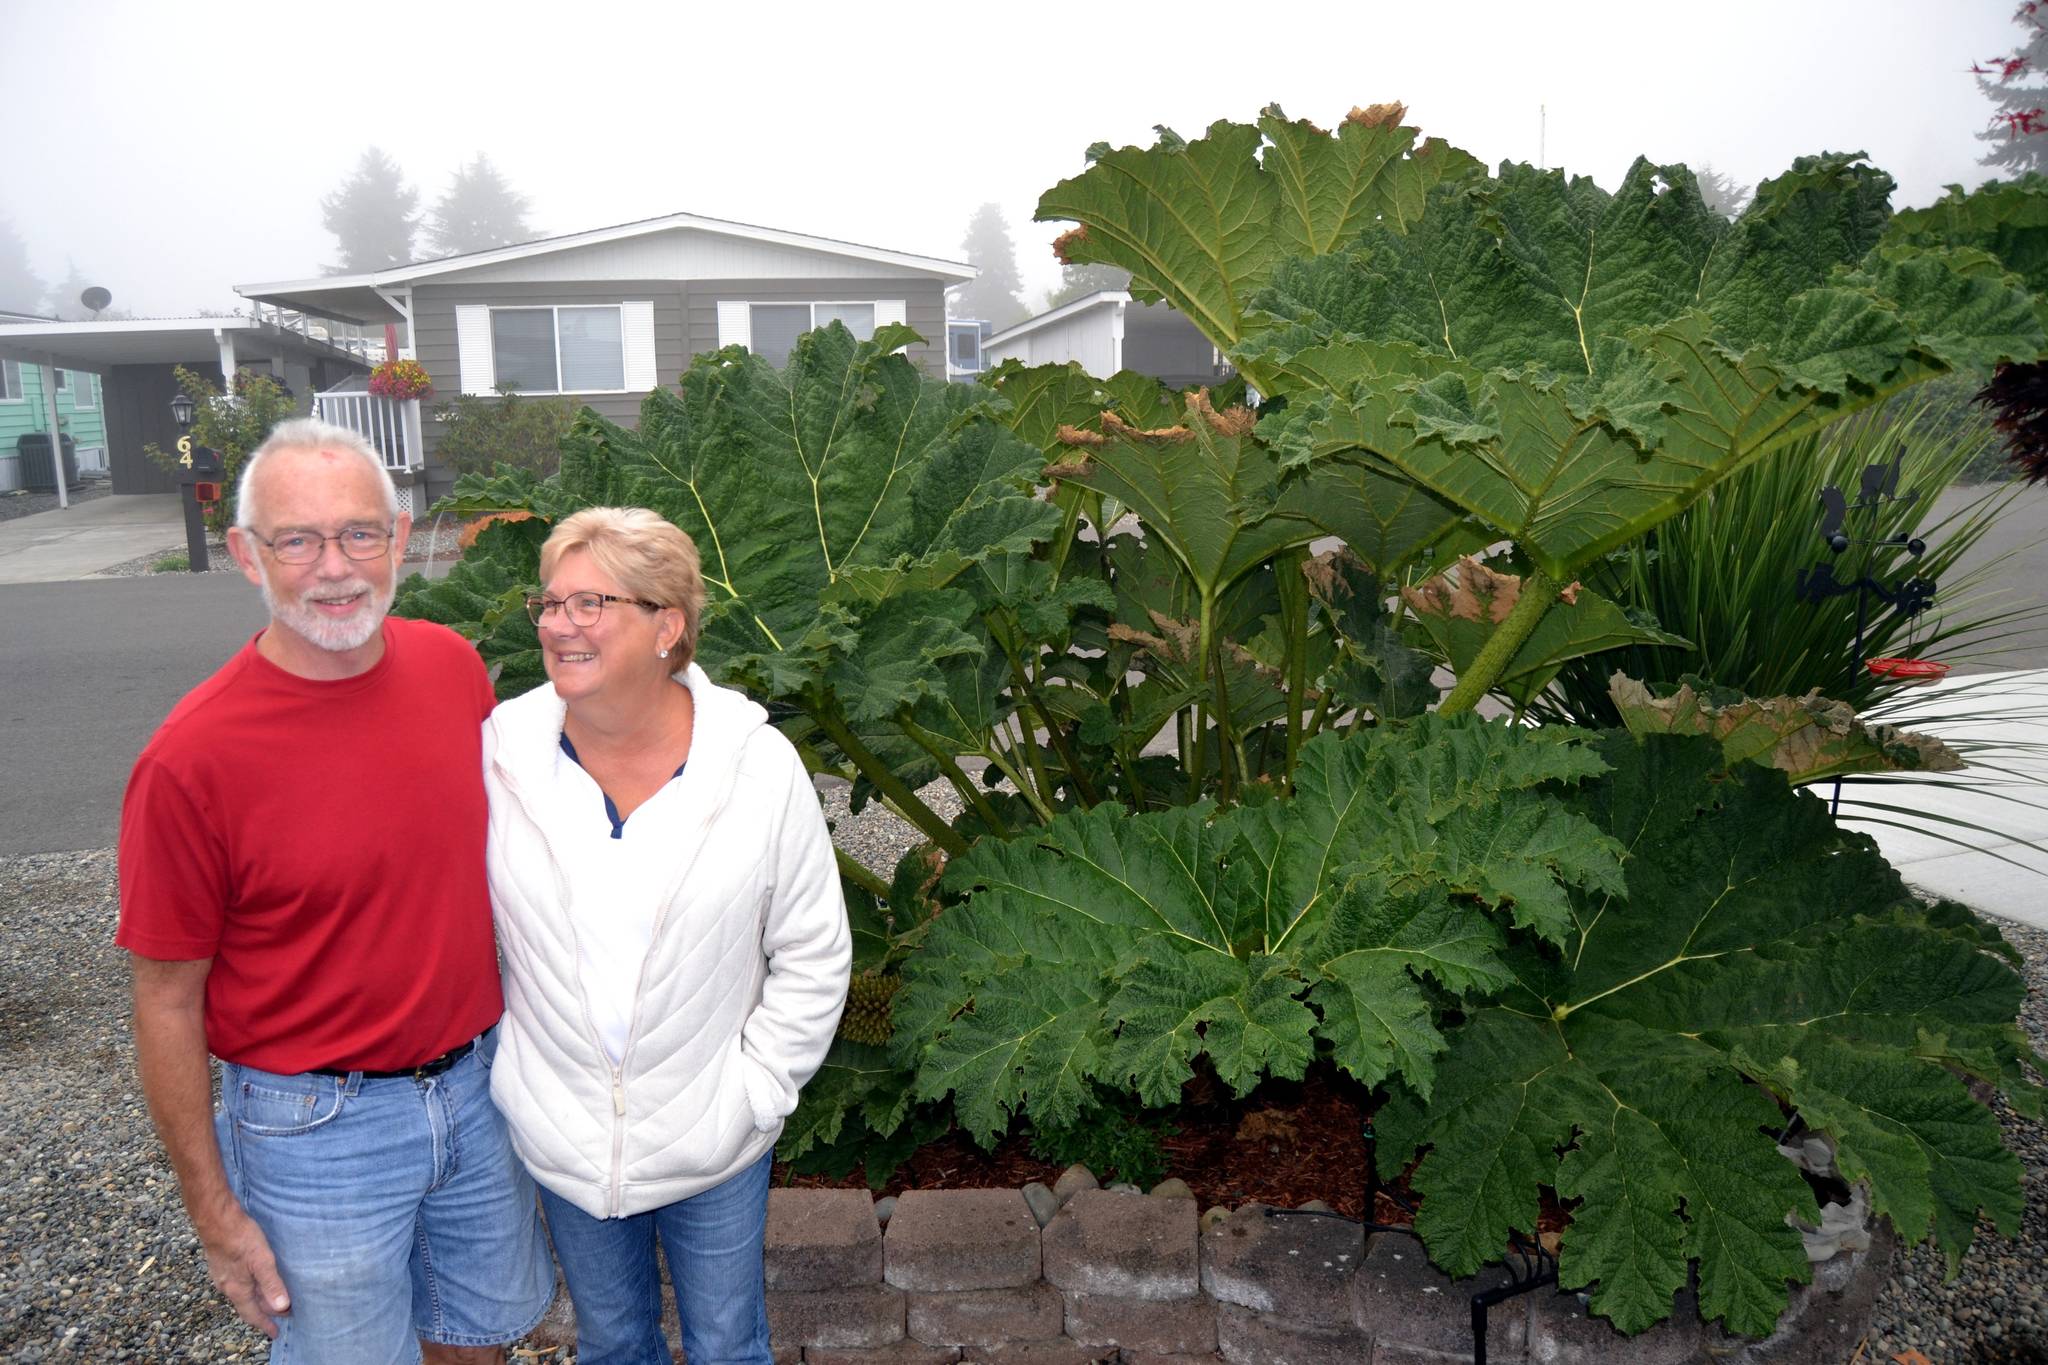 Sequim’s Larry and Susie Ormbrek offer leaves from their gunnera plant for people interested in creating their own concrete tables or bird baths using an online guide. They’ll trim the plants for the fall in the coming week or two. Sequim Gazette photo by Matthew Nash